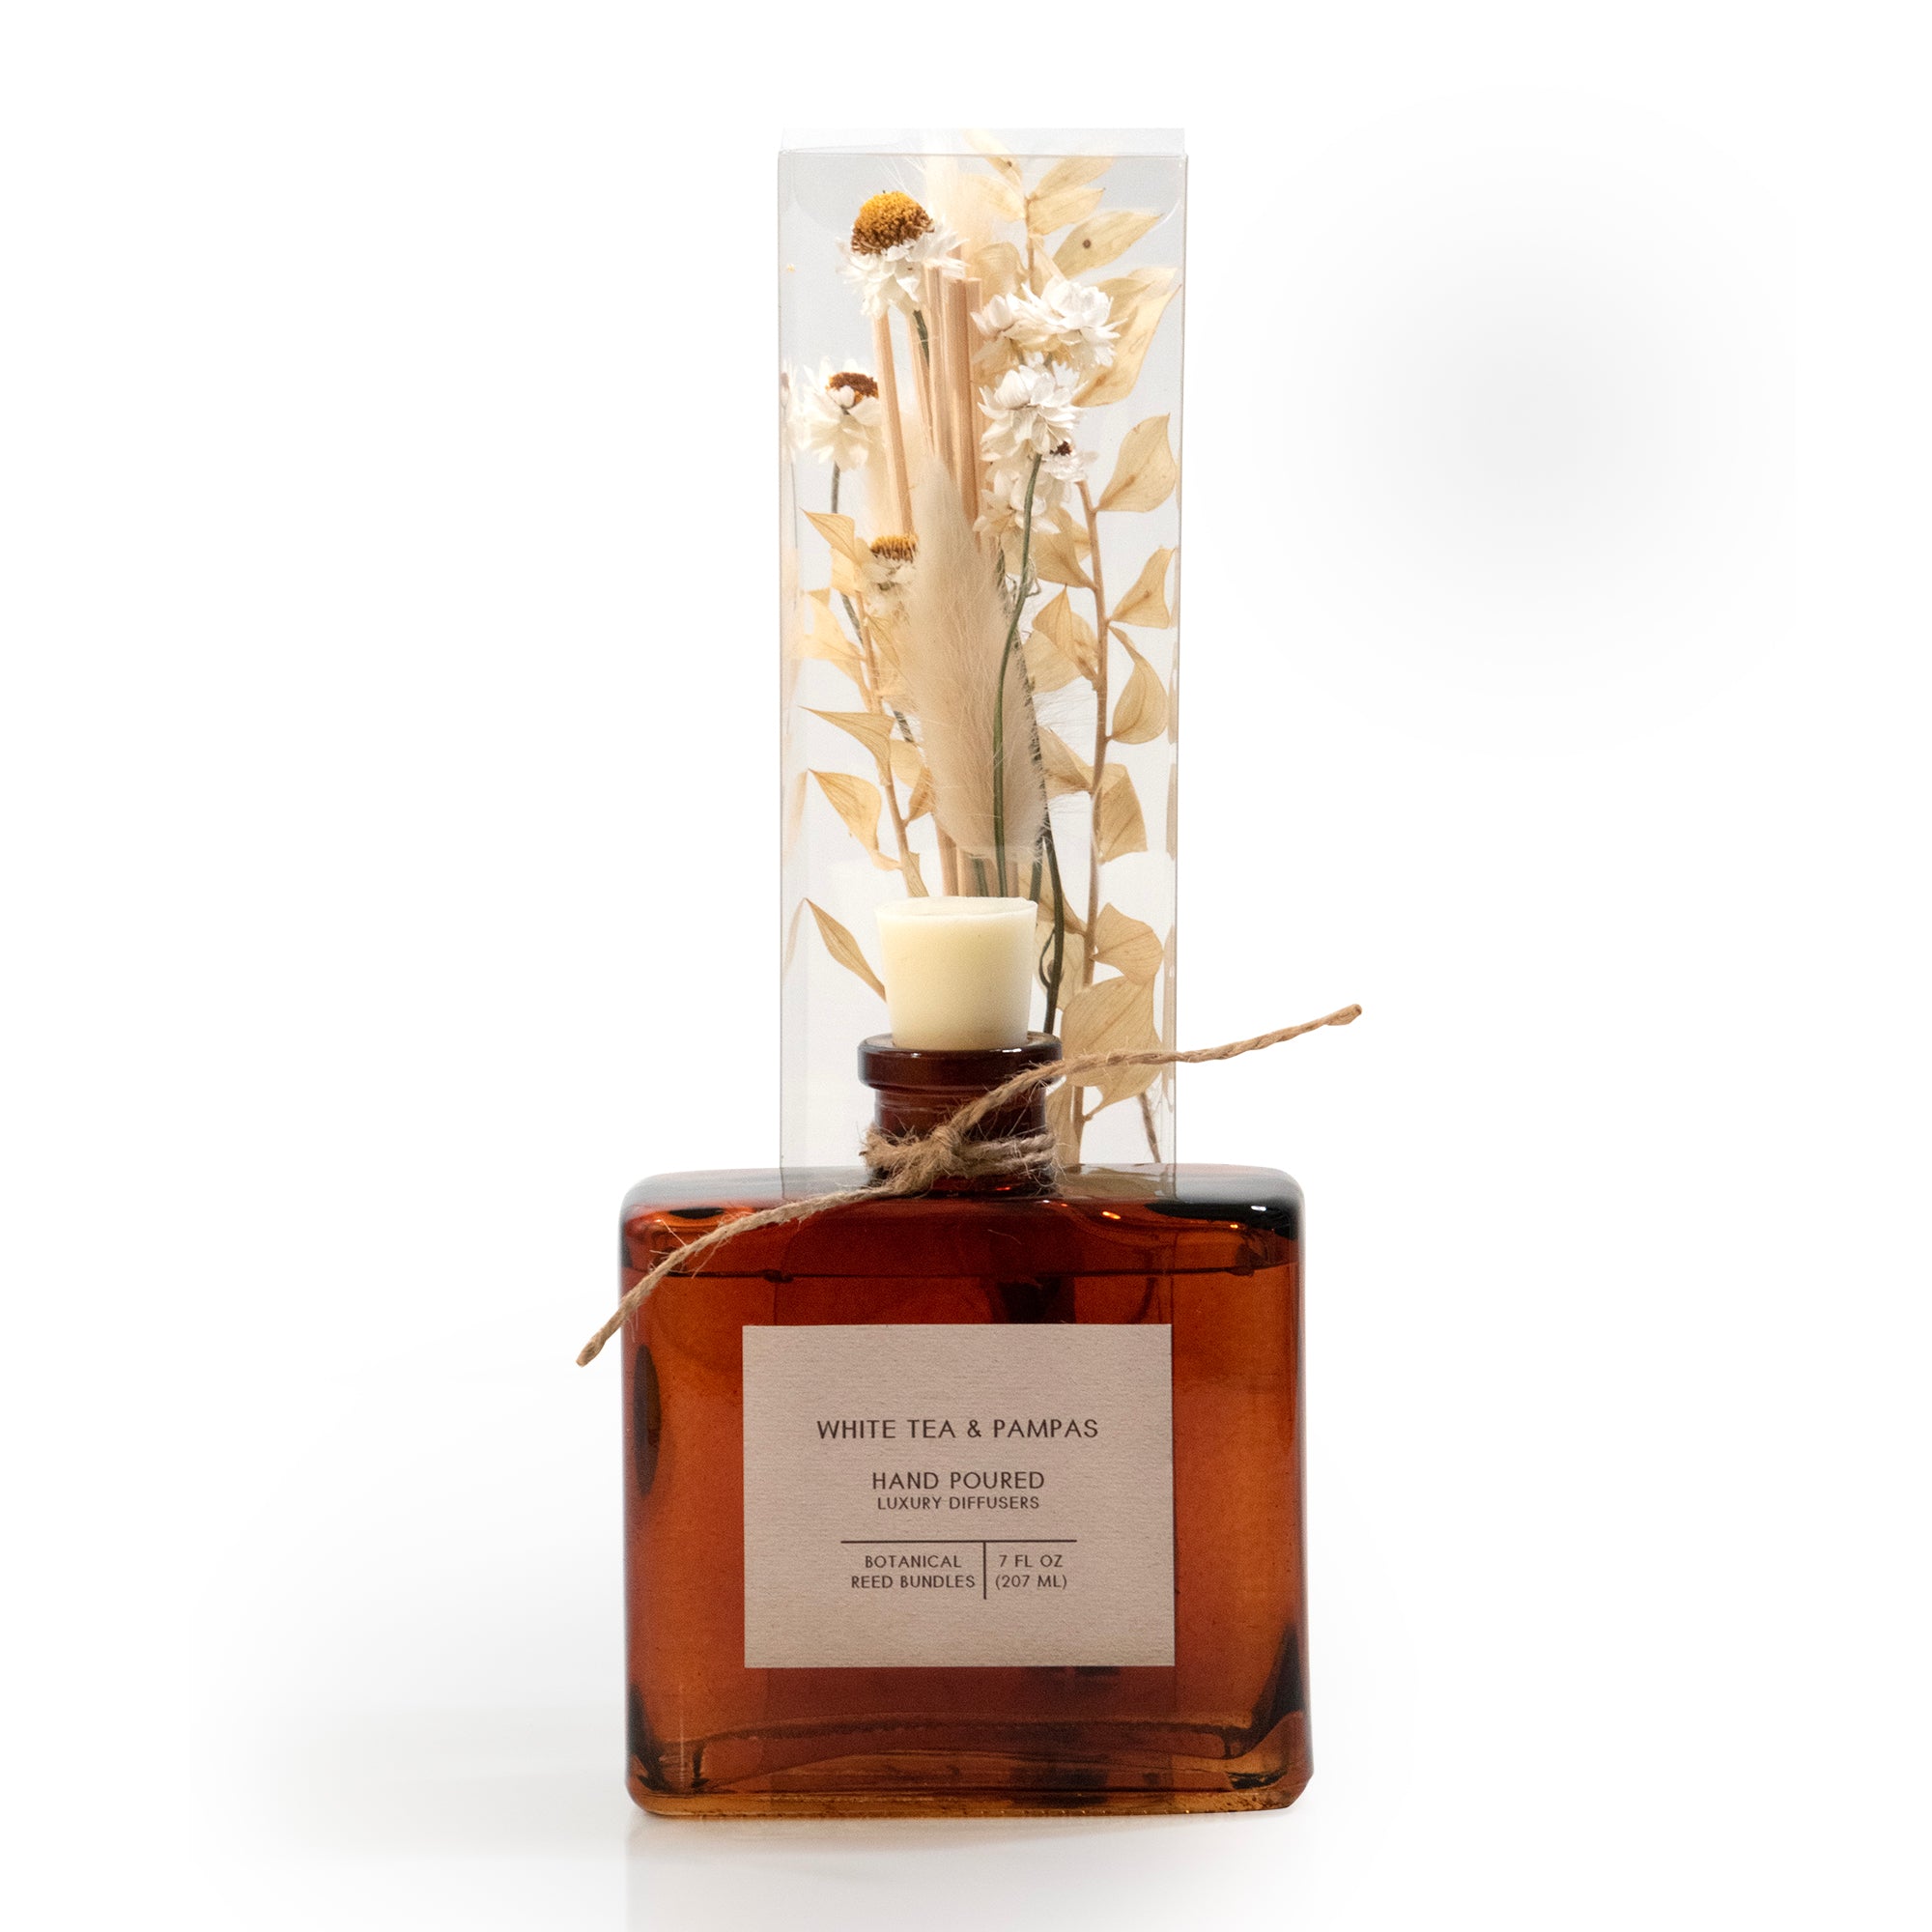 White Tea & Pampas Bouquet Reed Bundle Fragrance Diffuser packaging